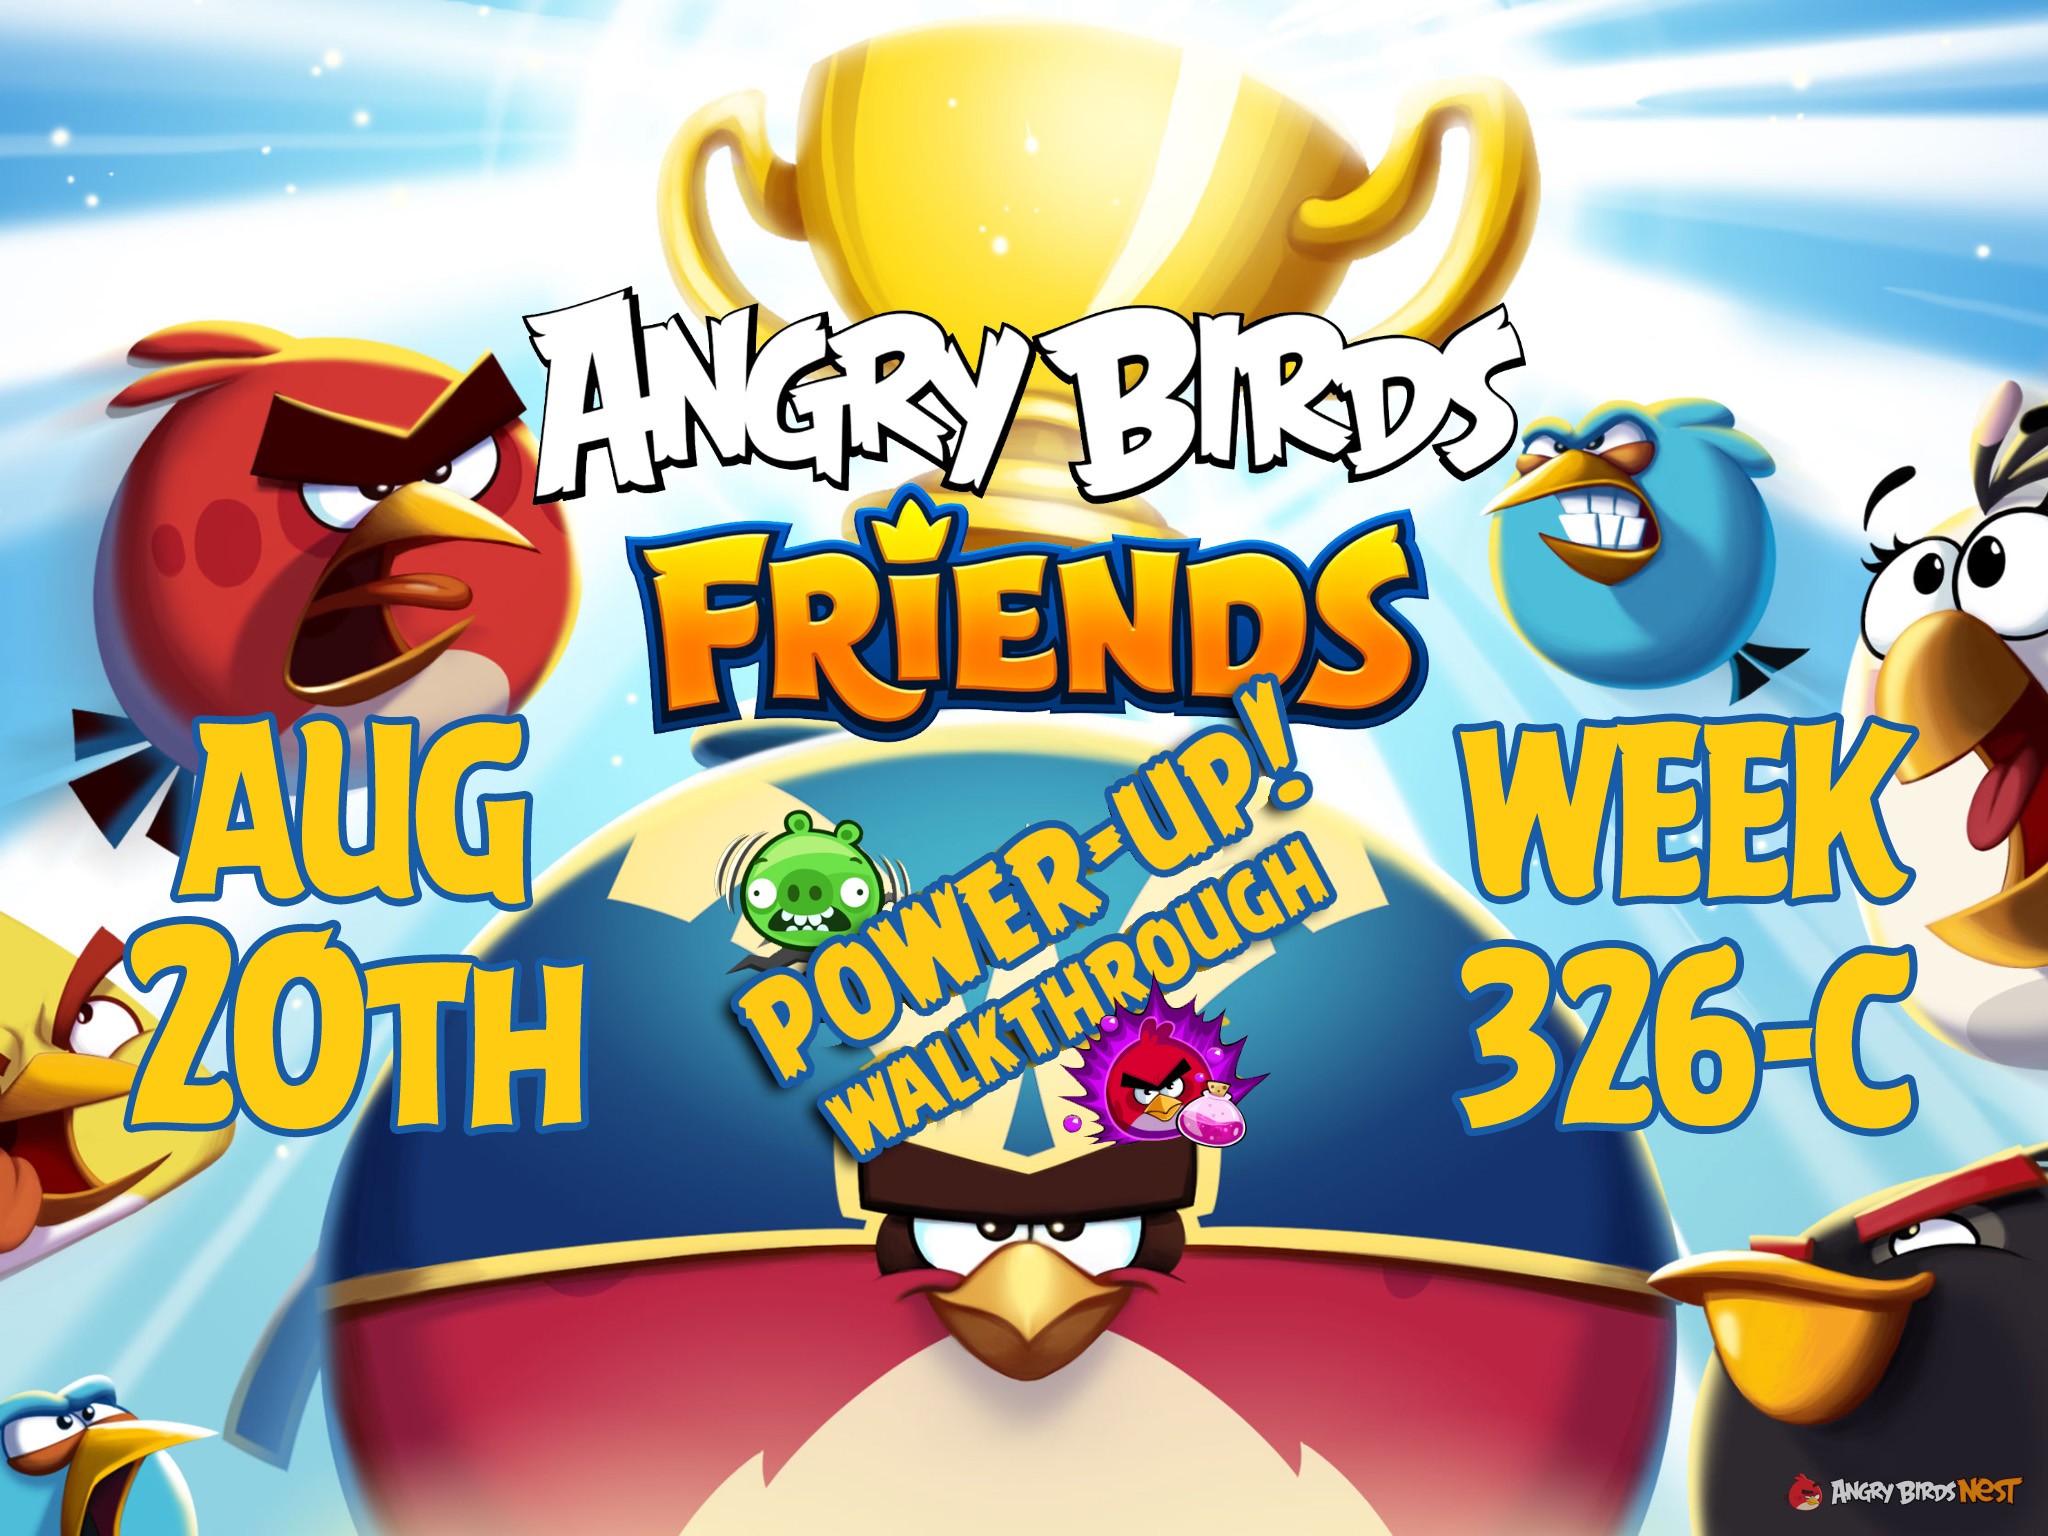 Angry-Birds-Friends-Tournament-Week-326-C-Feature-Image-PU